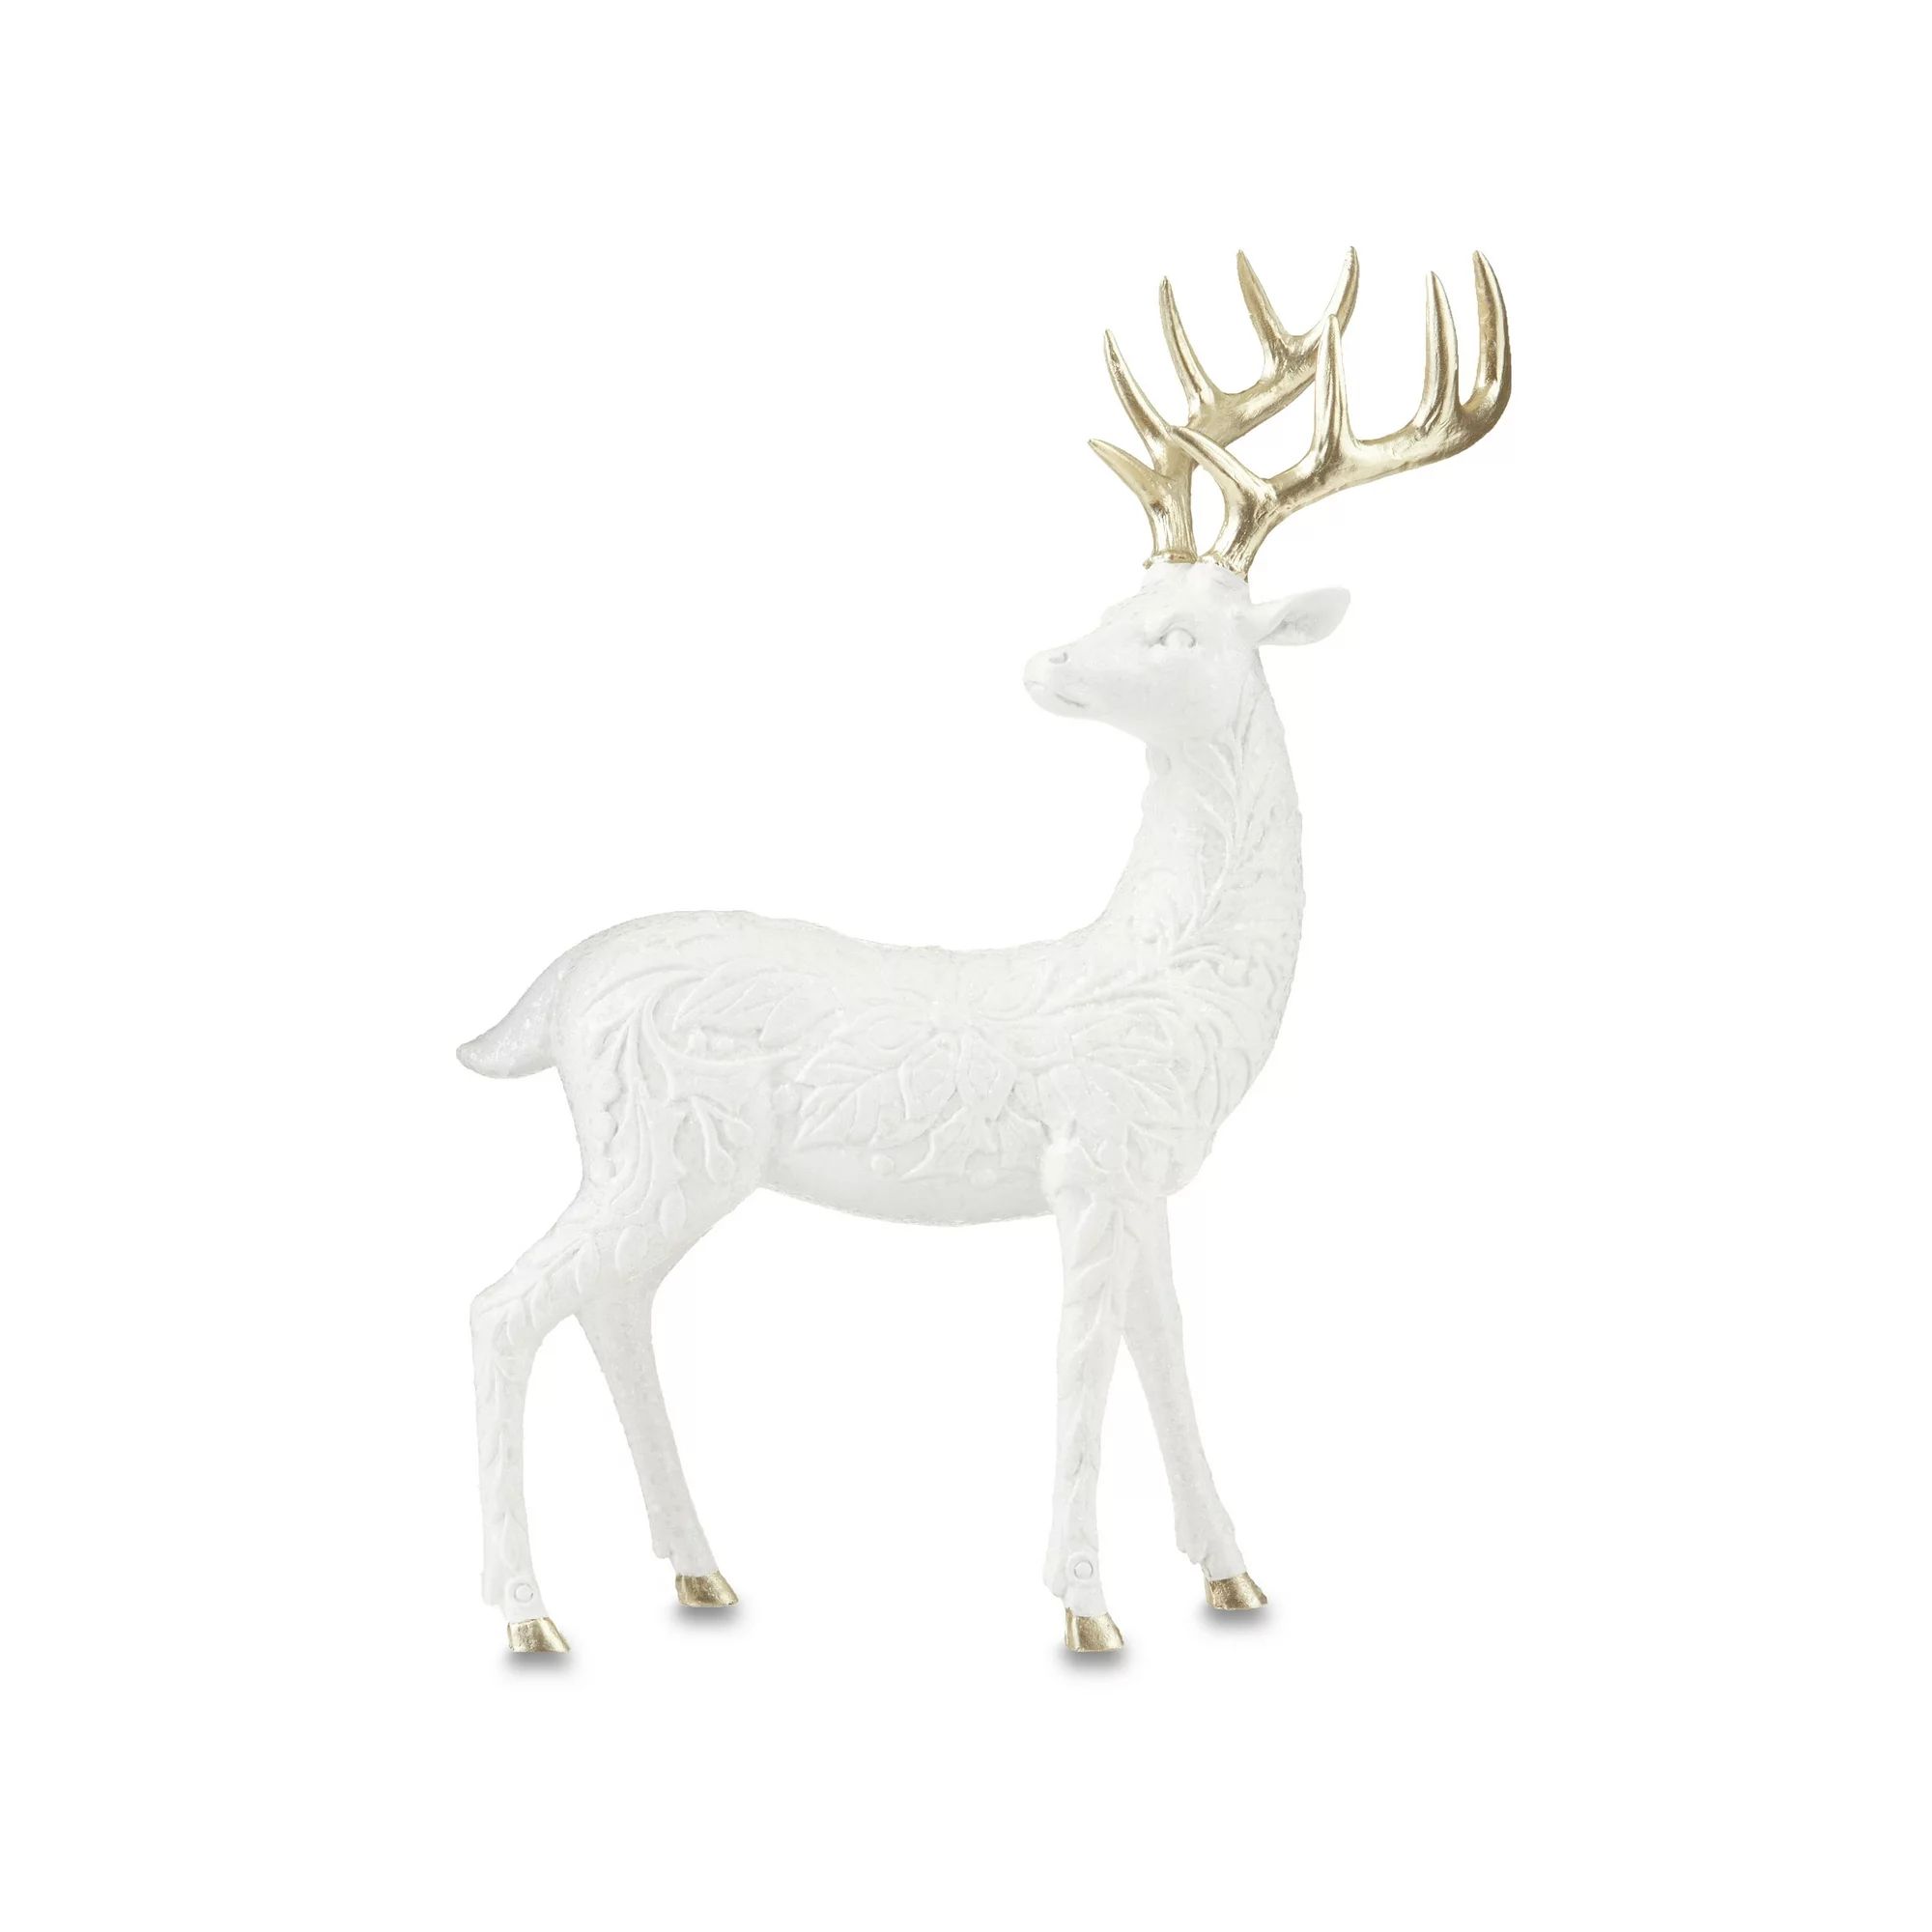 My Texas House White and Gold Standing Deer Decoration, 15 inch | Walmart (US)